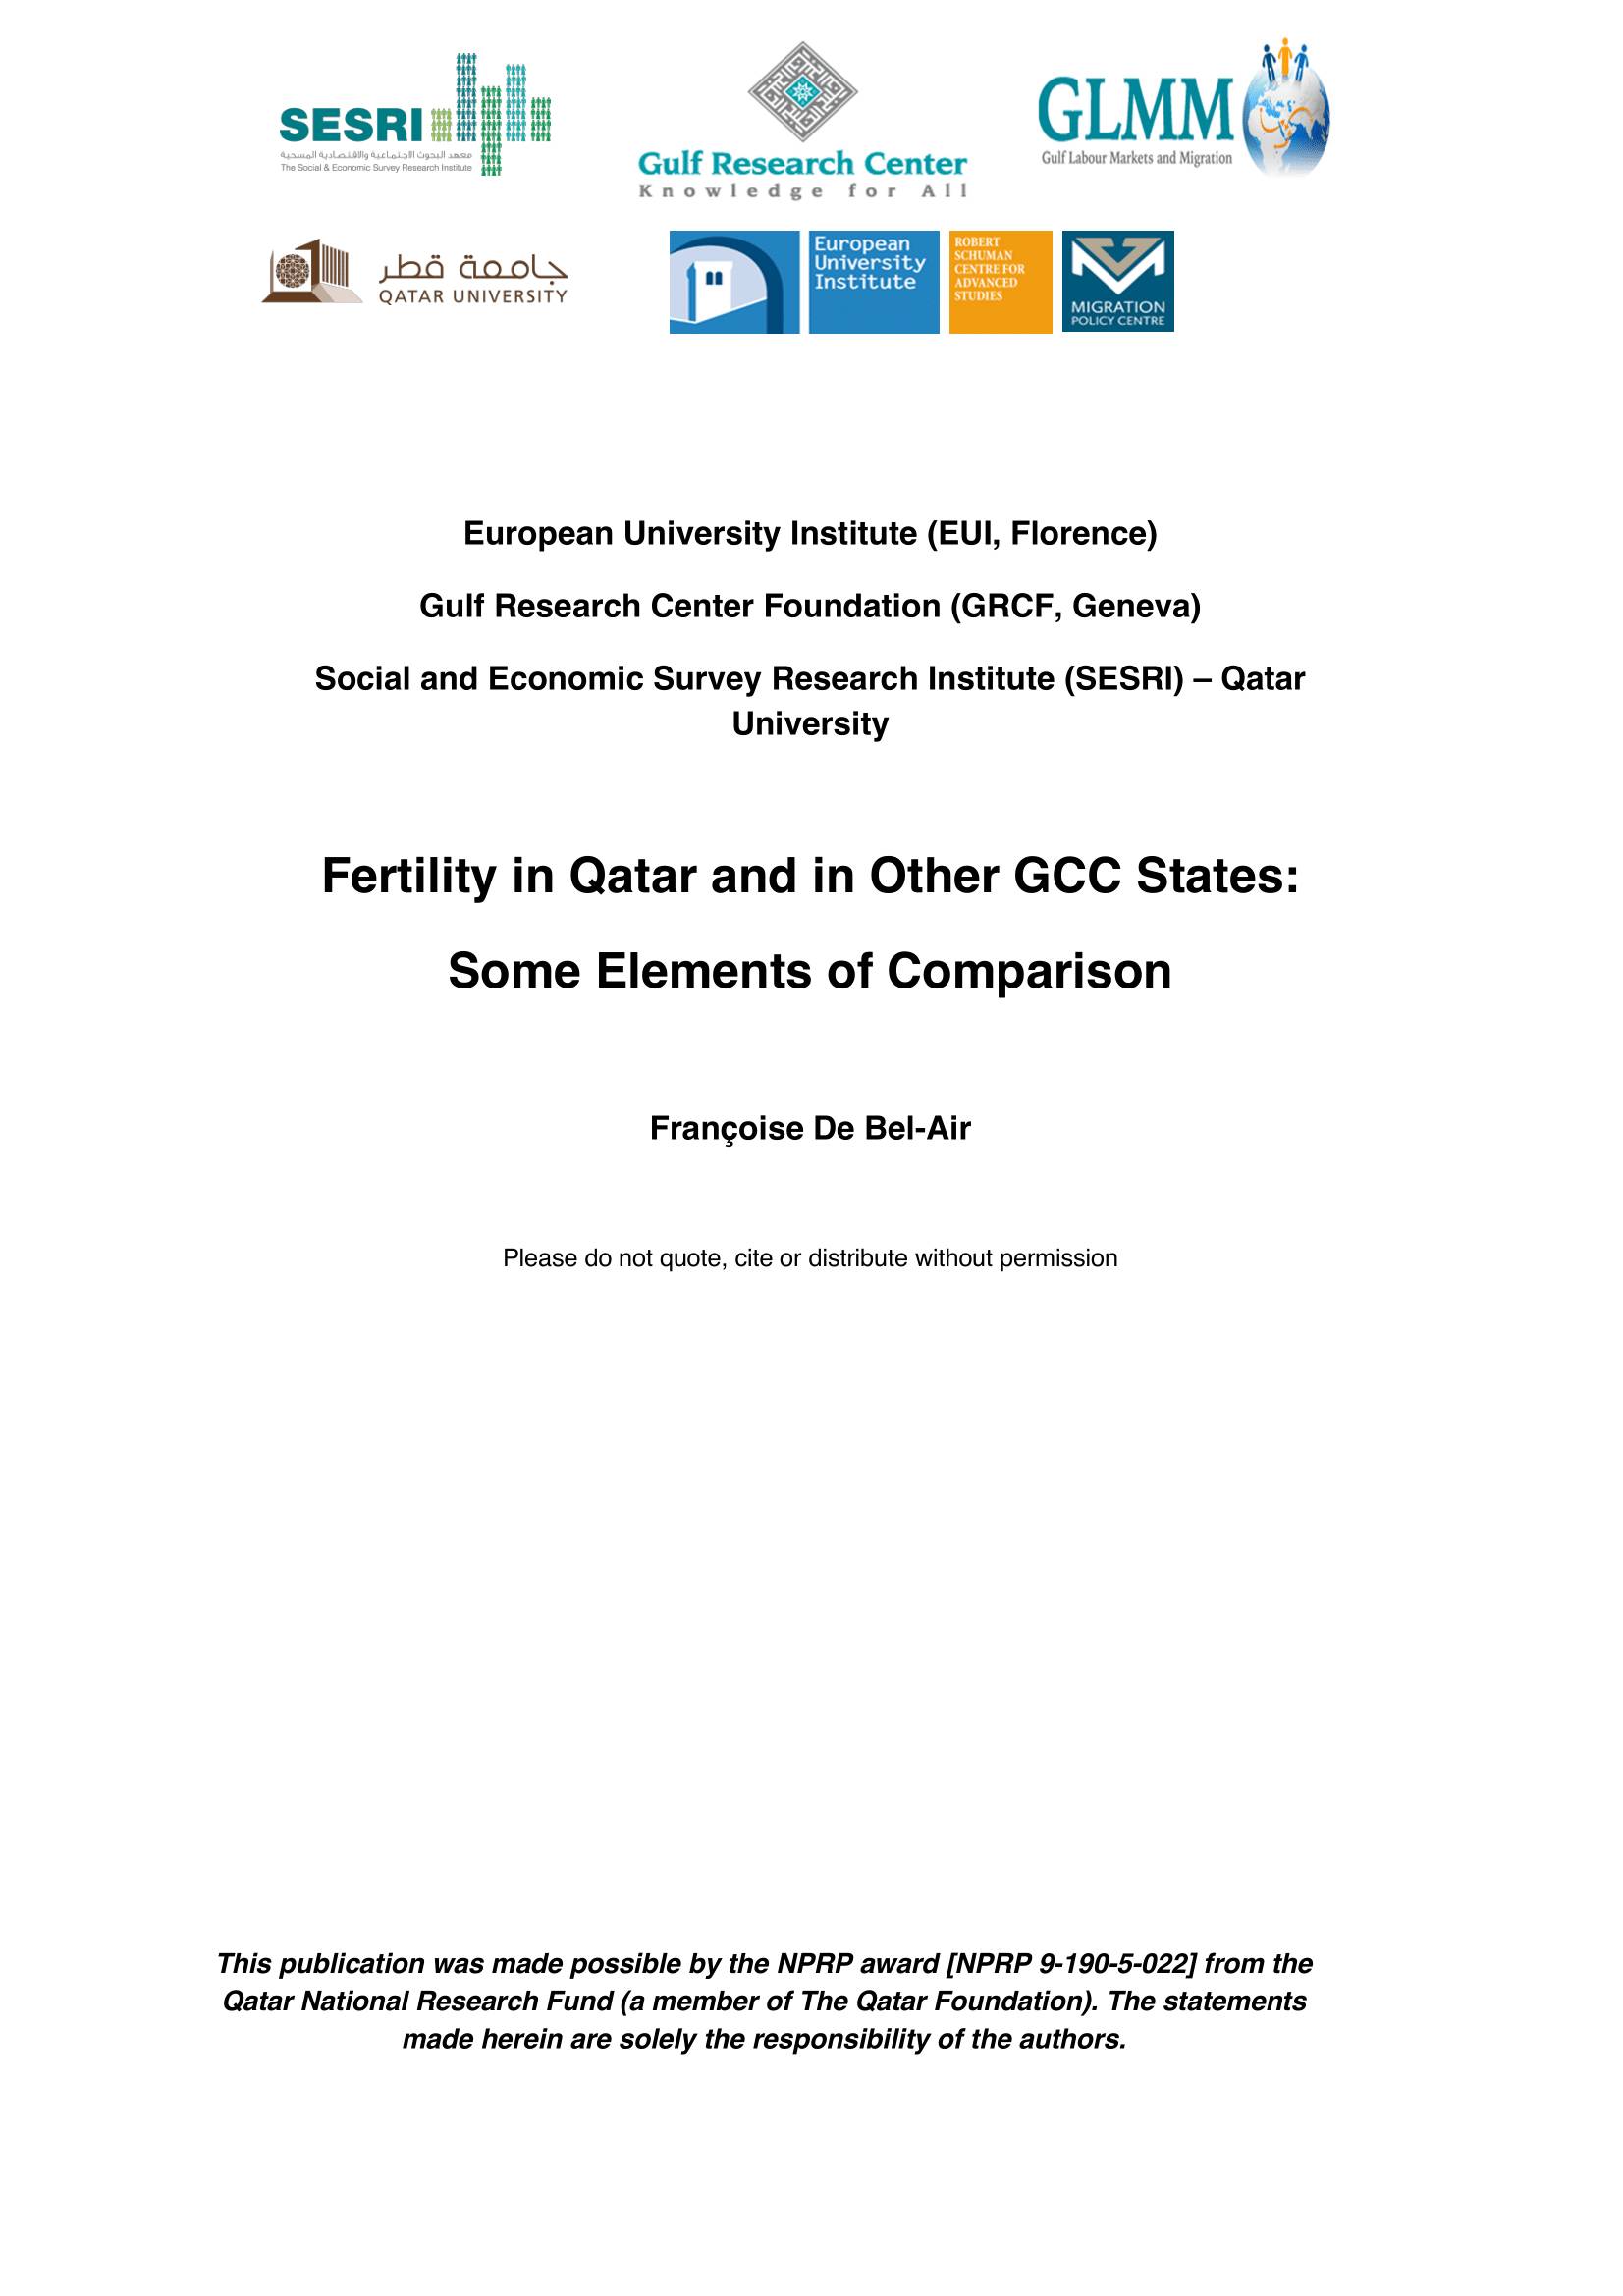 Fertility in Qatar and in Other GCC States: Some Elements of Comparison